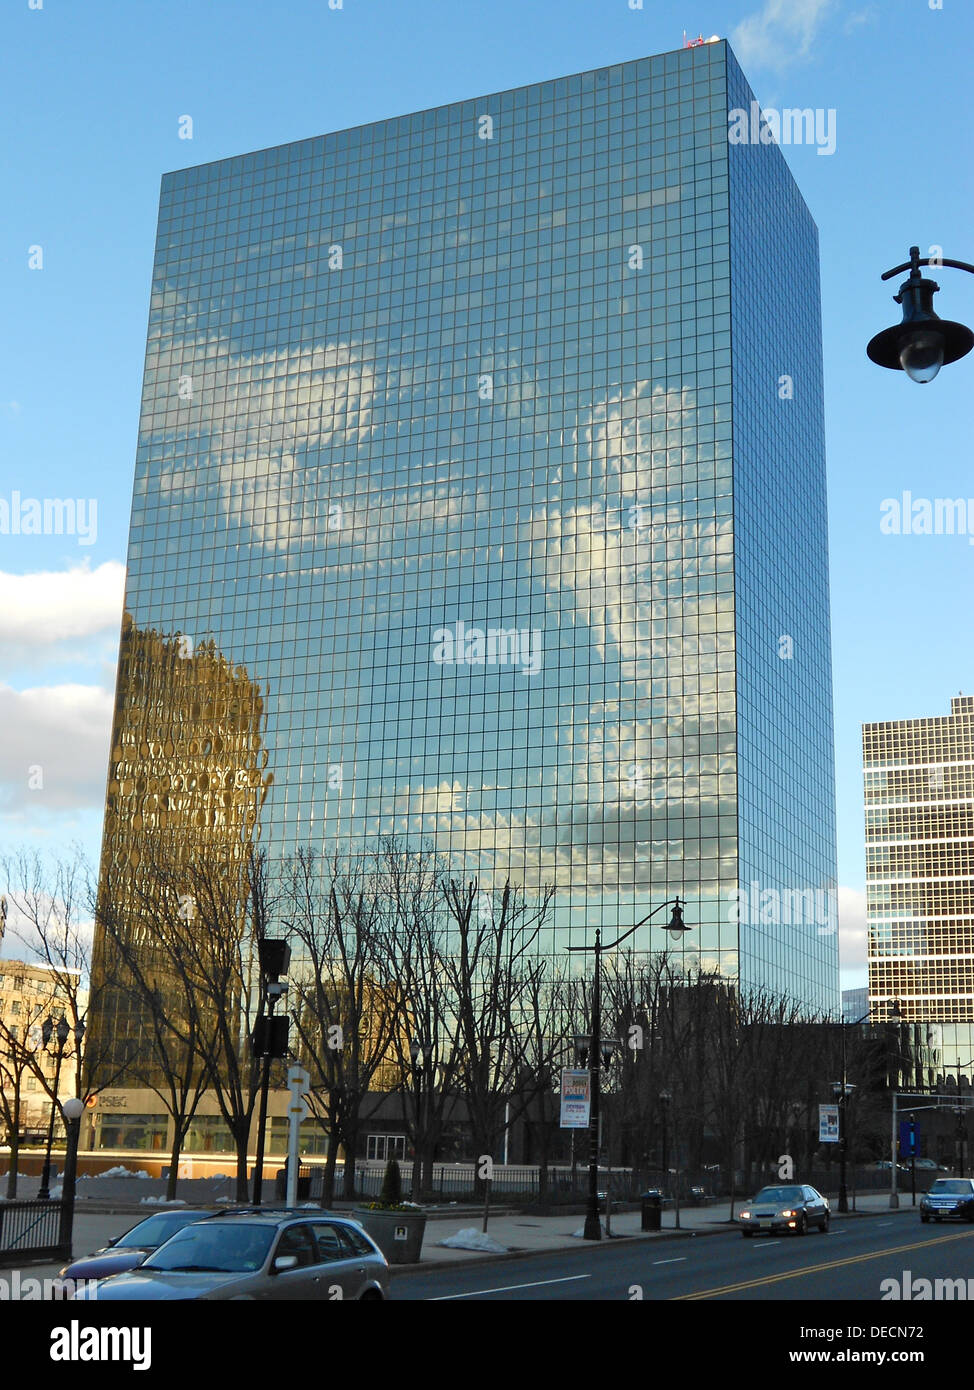 PSE&G (Public Service Enterprise Group) headquarters building at 80 Park Place (just off Broad Street), in Newark, New Jersey. Stock Photo